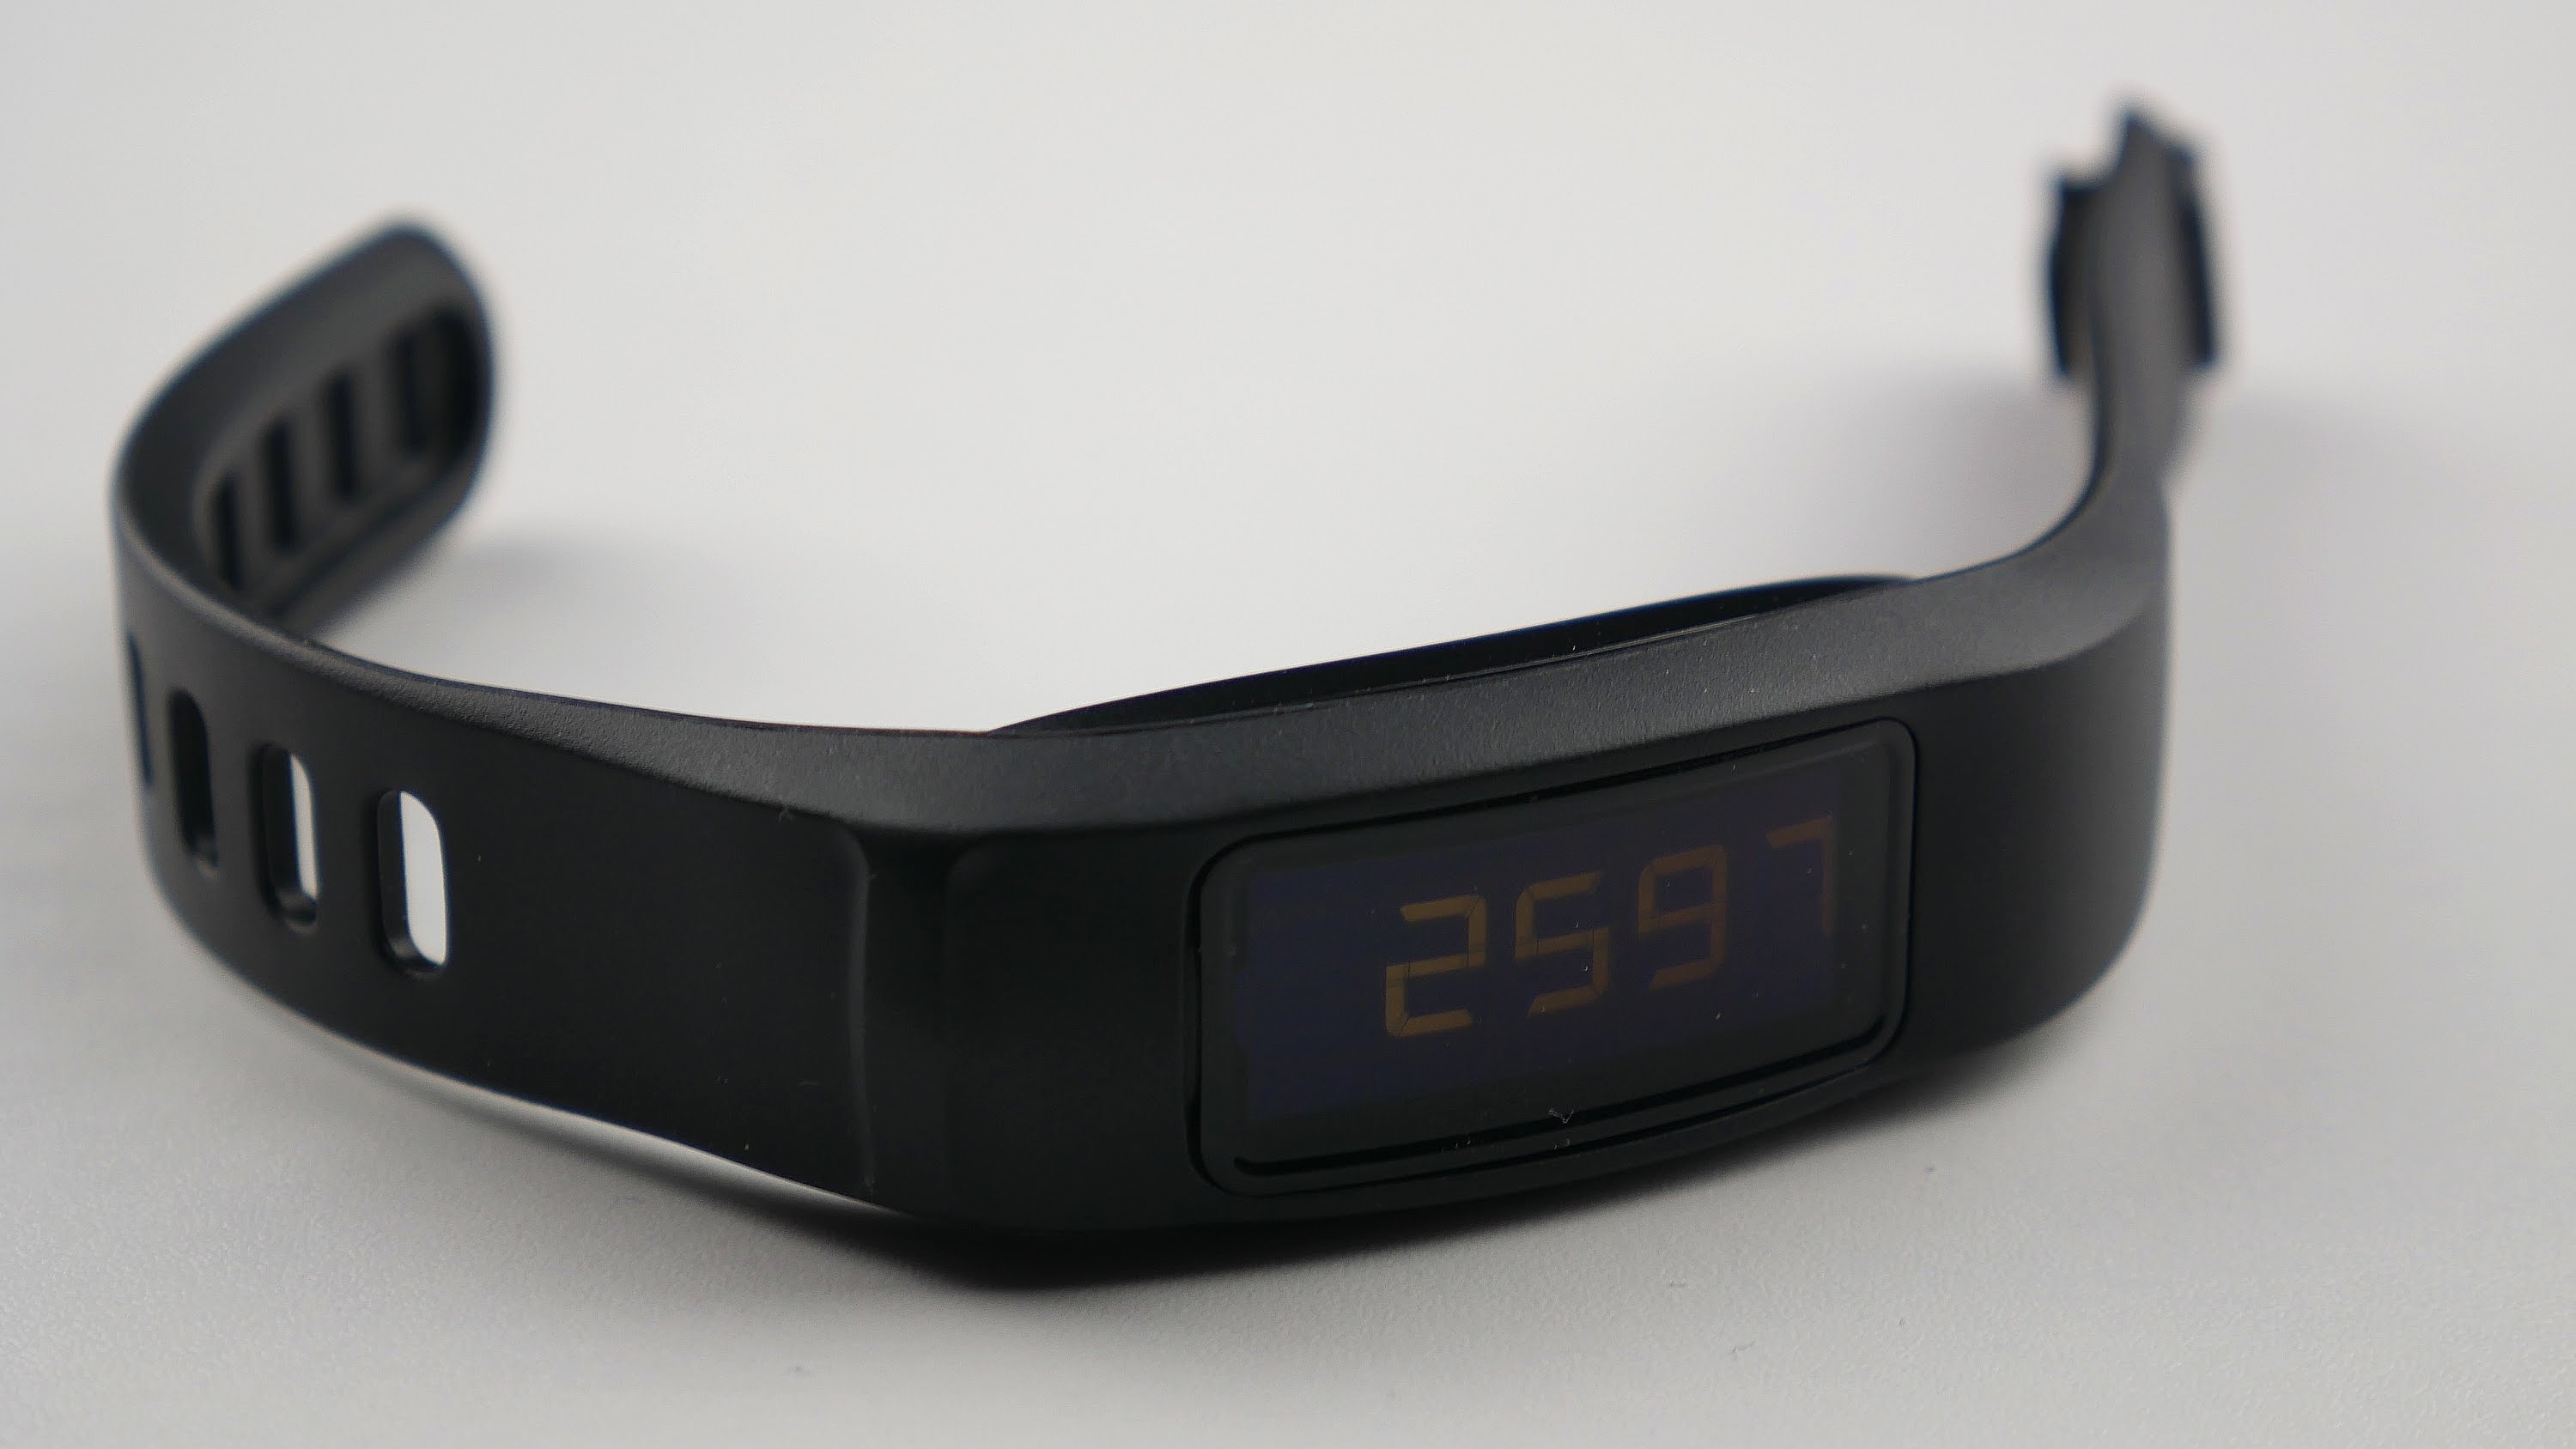 Fitness trackers guide part 1: don’t prioritise goals over common sense